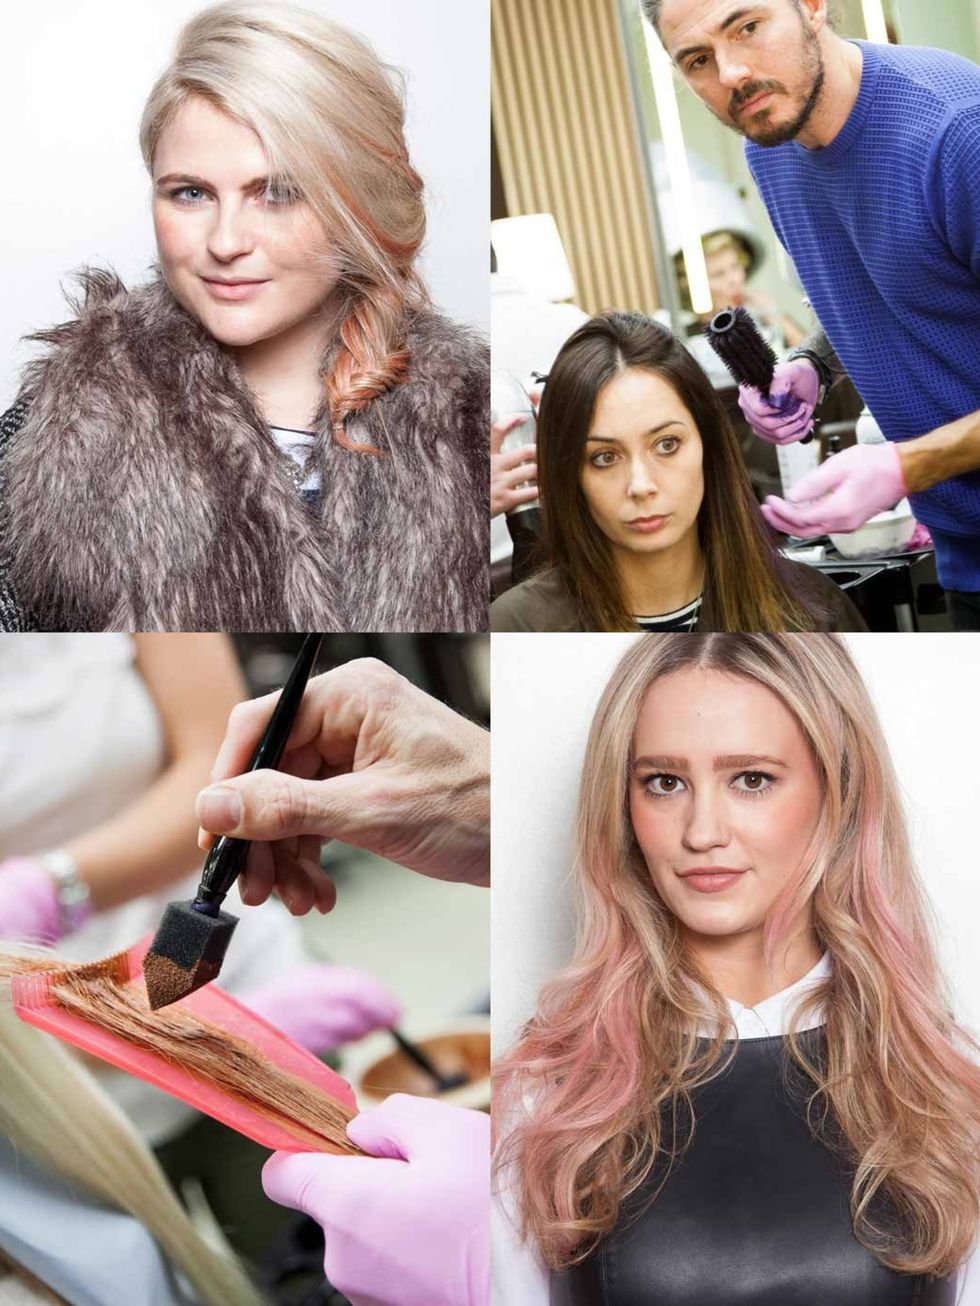 &lt;p&gt;Gone are the days when dying your hair candyfloss pink was deemed too young; over the past year bright, bold and unashamedly rainbow coloured hair has become the norm.&lt;/p&gt;&lt;p&gt;With poster girls like &lt;a href=&quot;http://www.elleuk.co